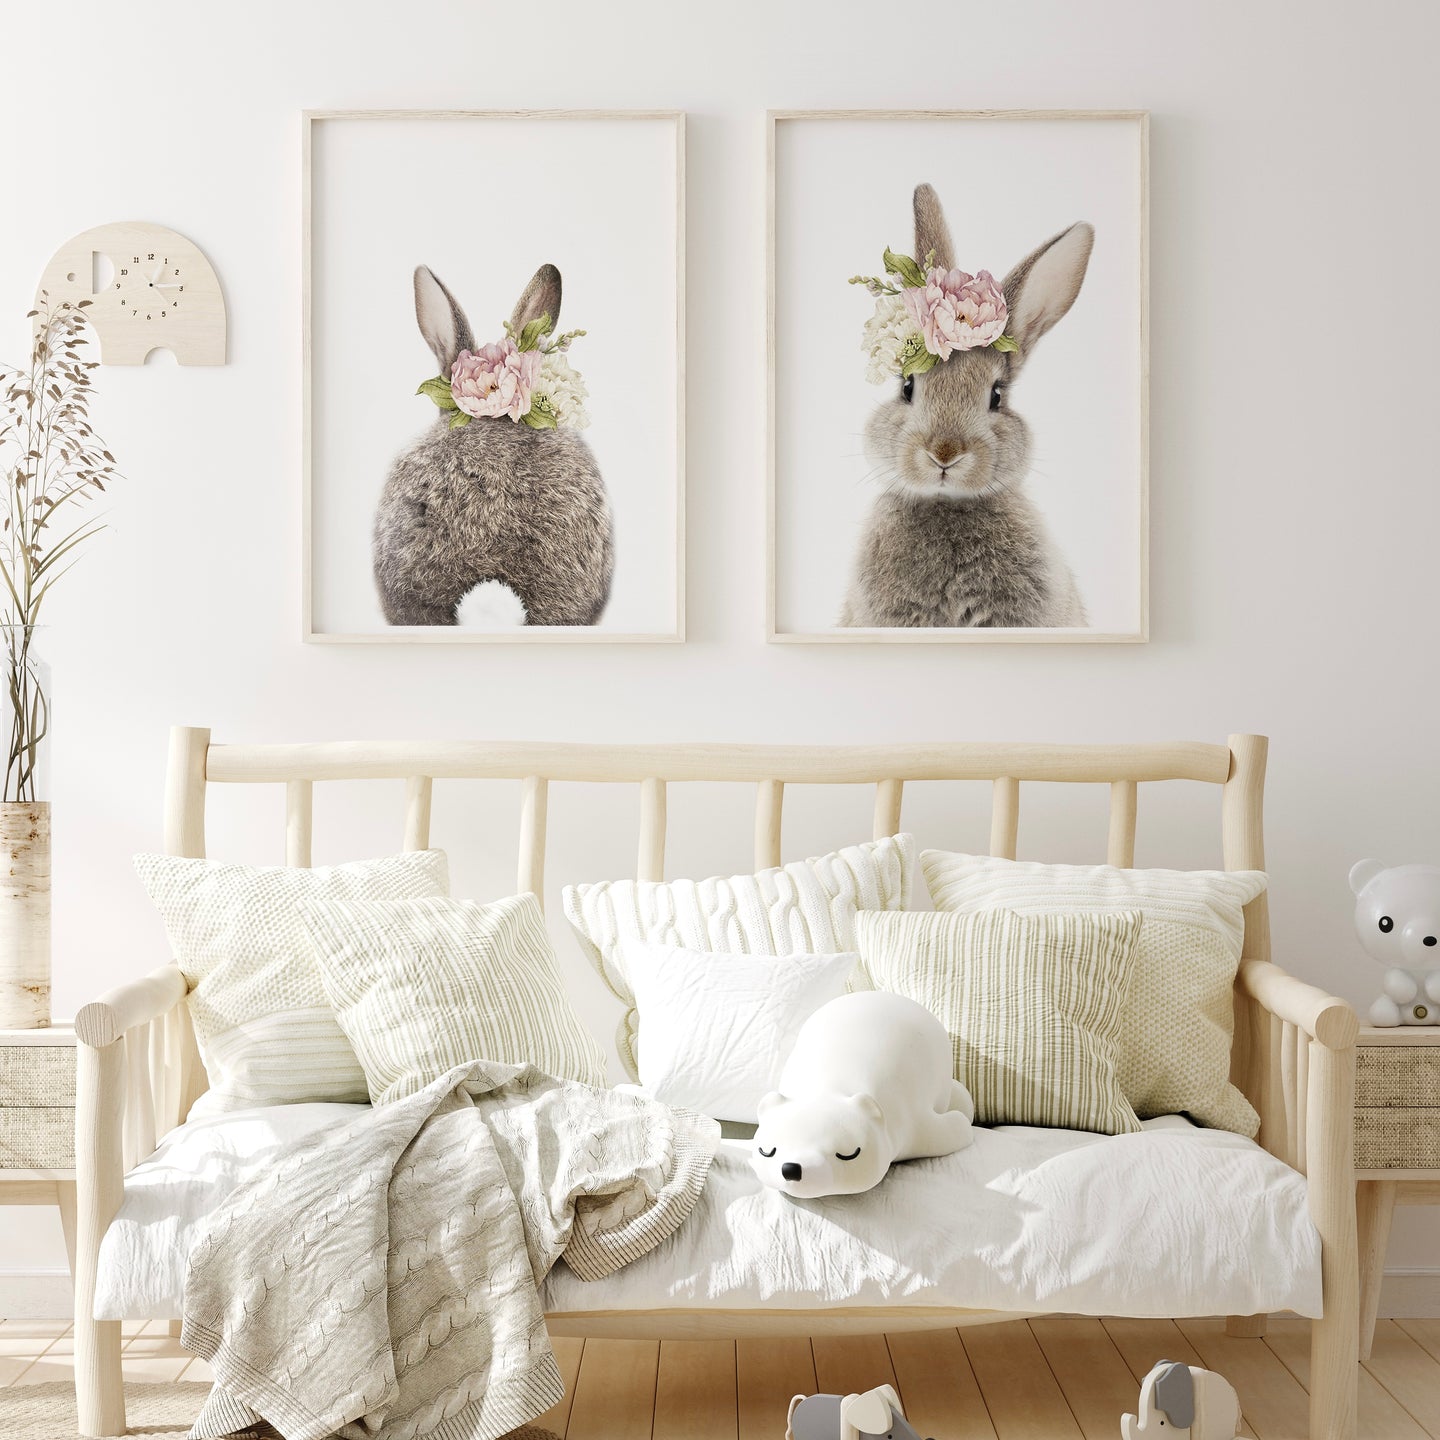 Floral Bunny Nursery Gallery Wall By Lola Peacock |  Set of 2 Gallery Prints